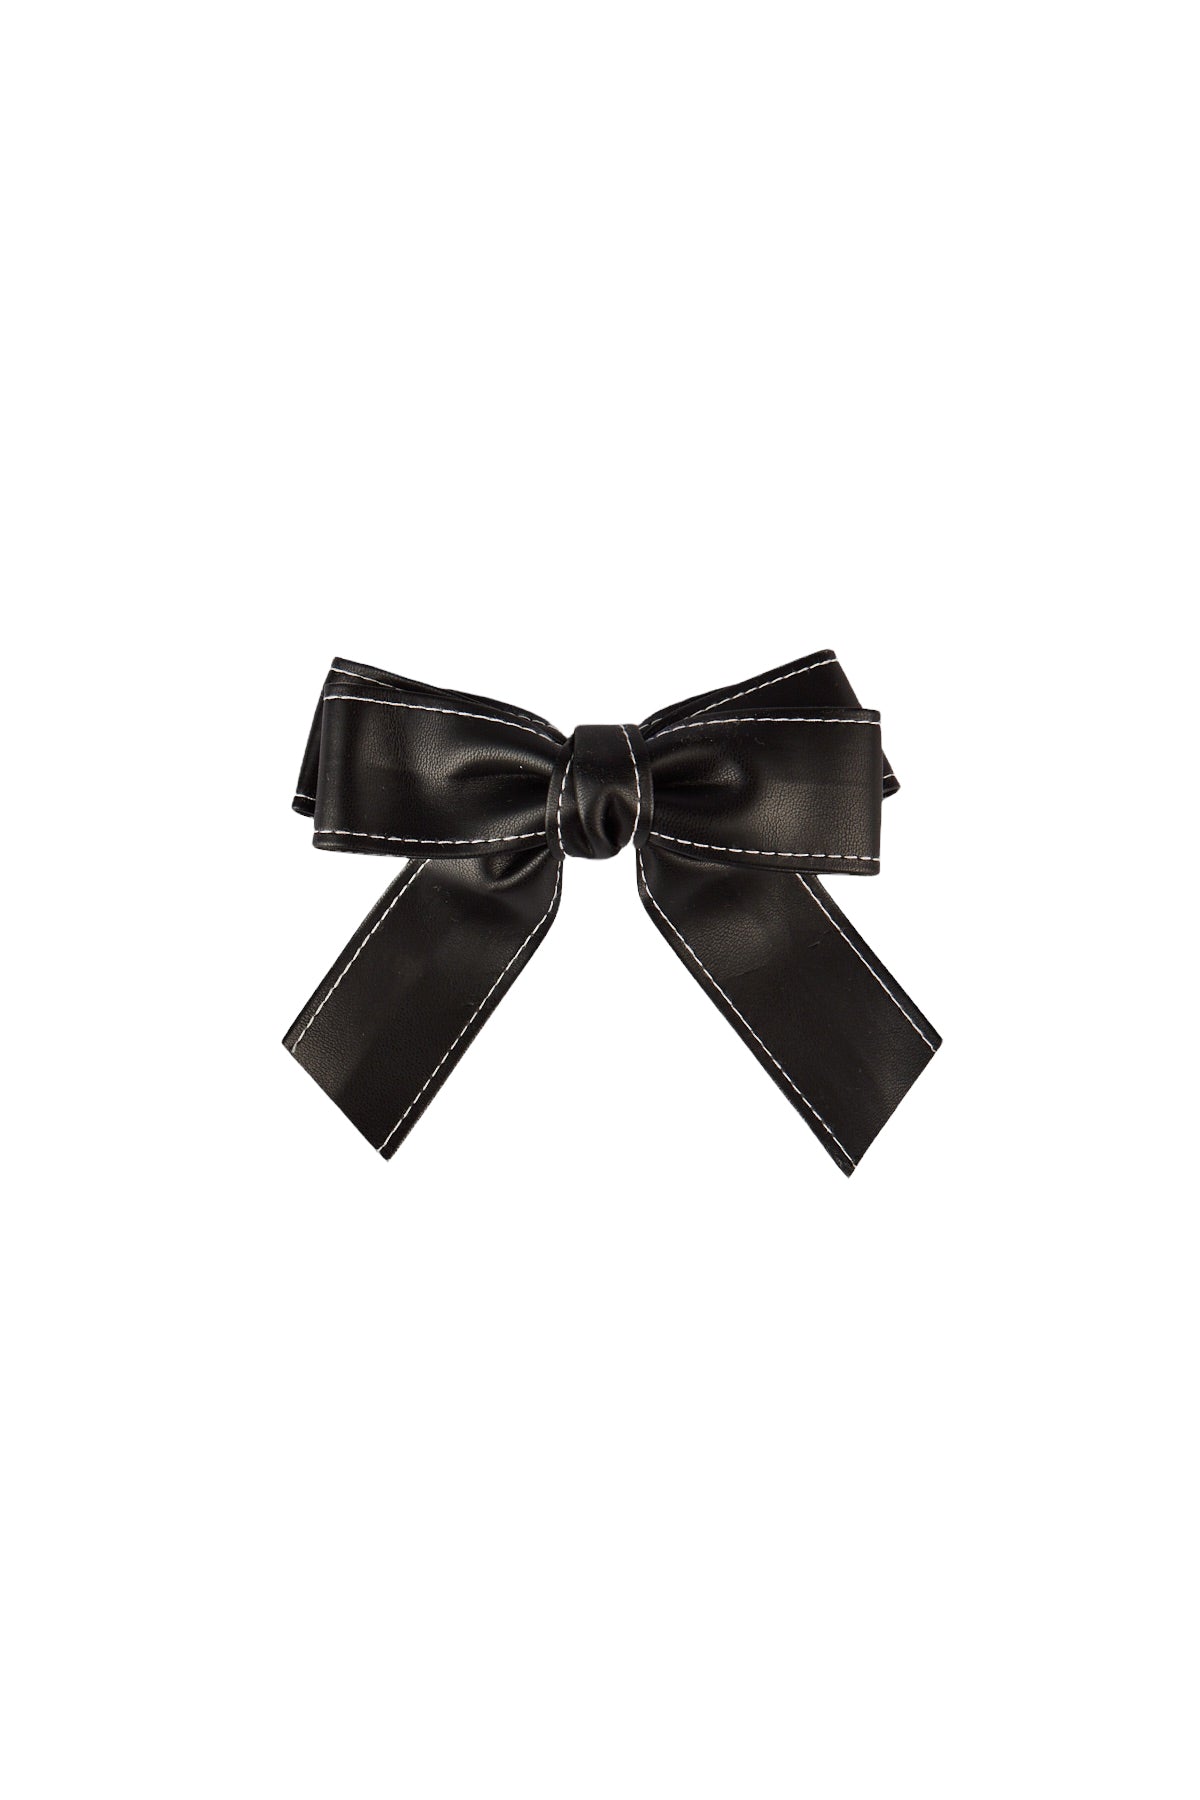 Lexi Leather Bow